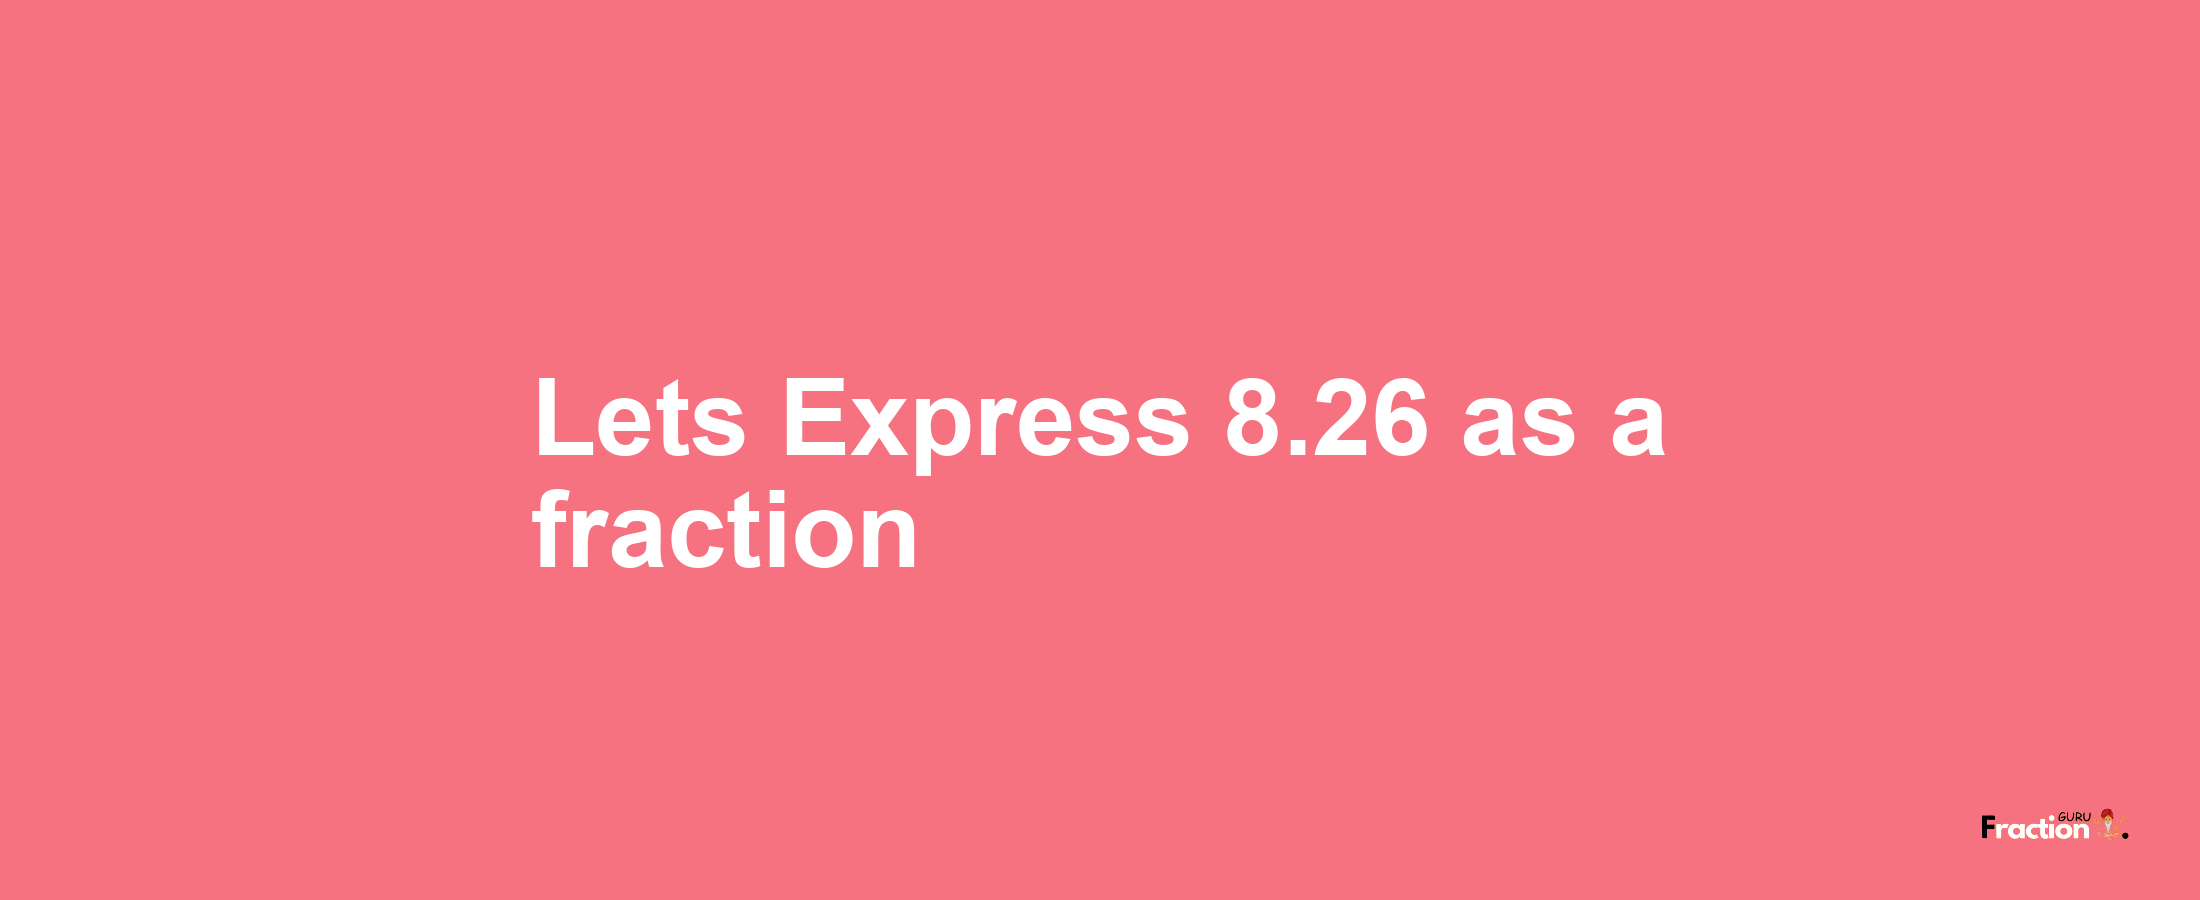 Lets Express 8.26 as afraction